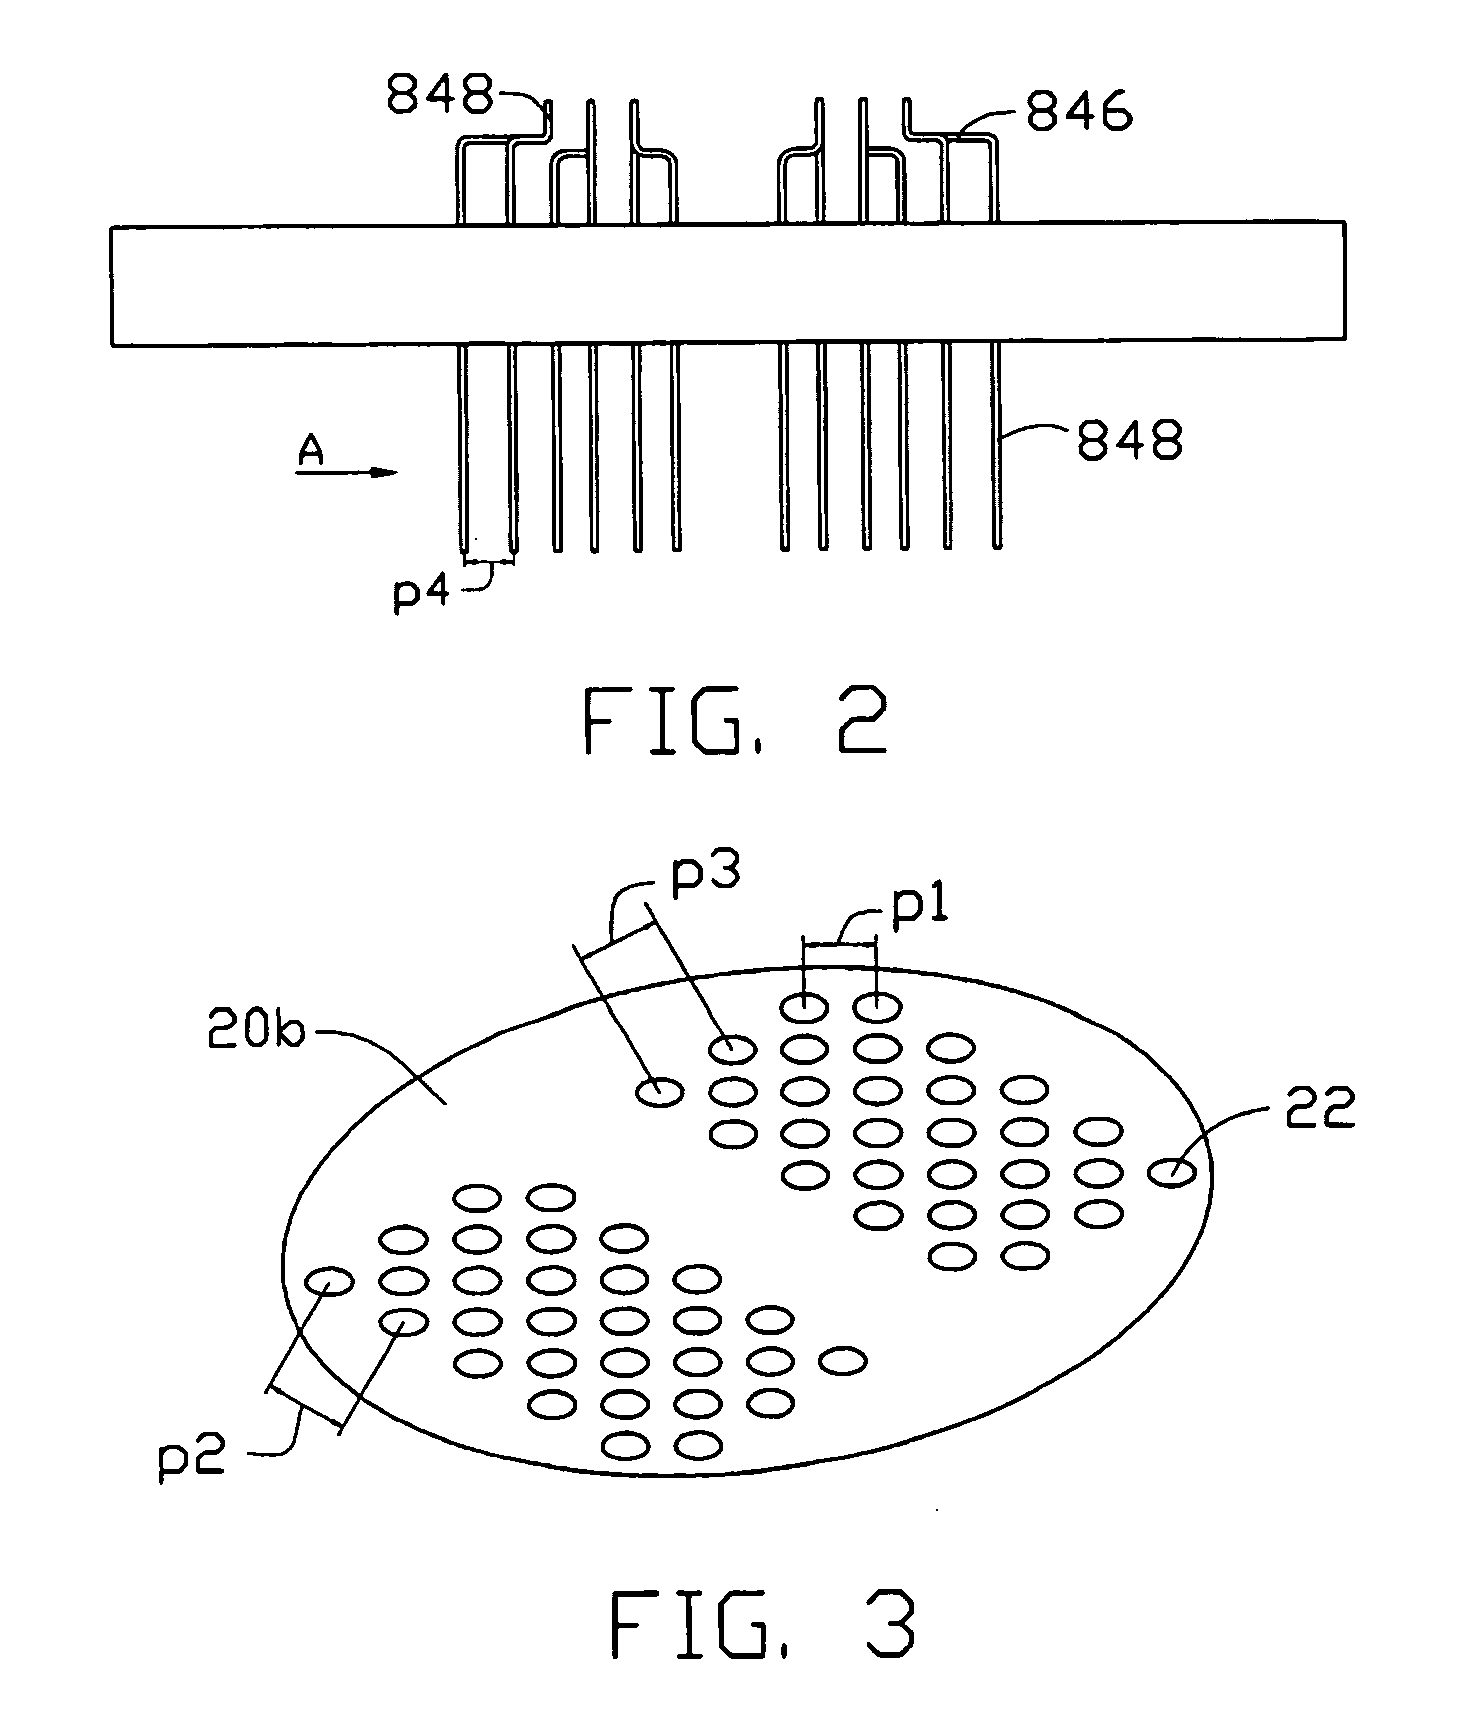 Electrical connector with different pitch terminals